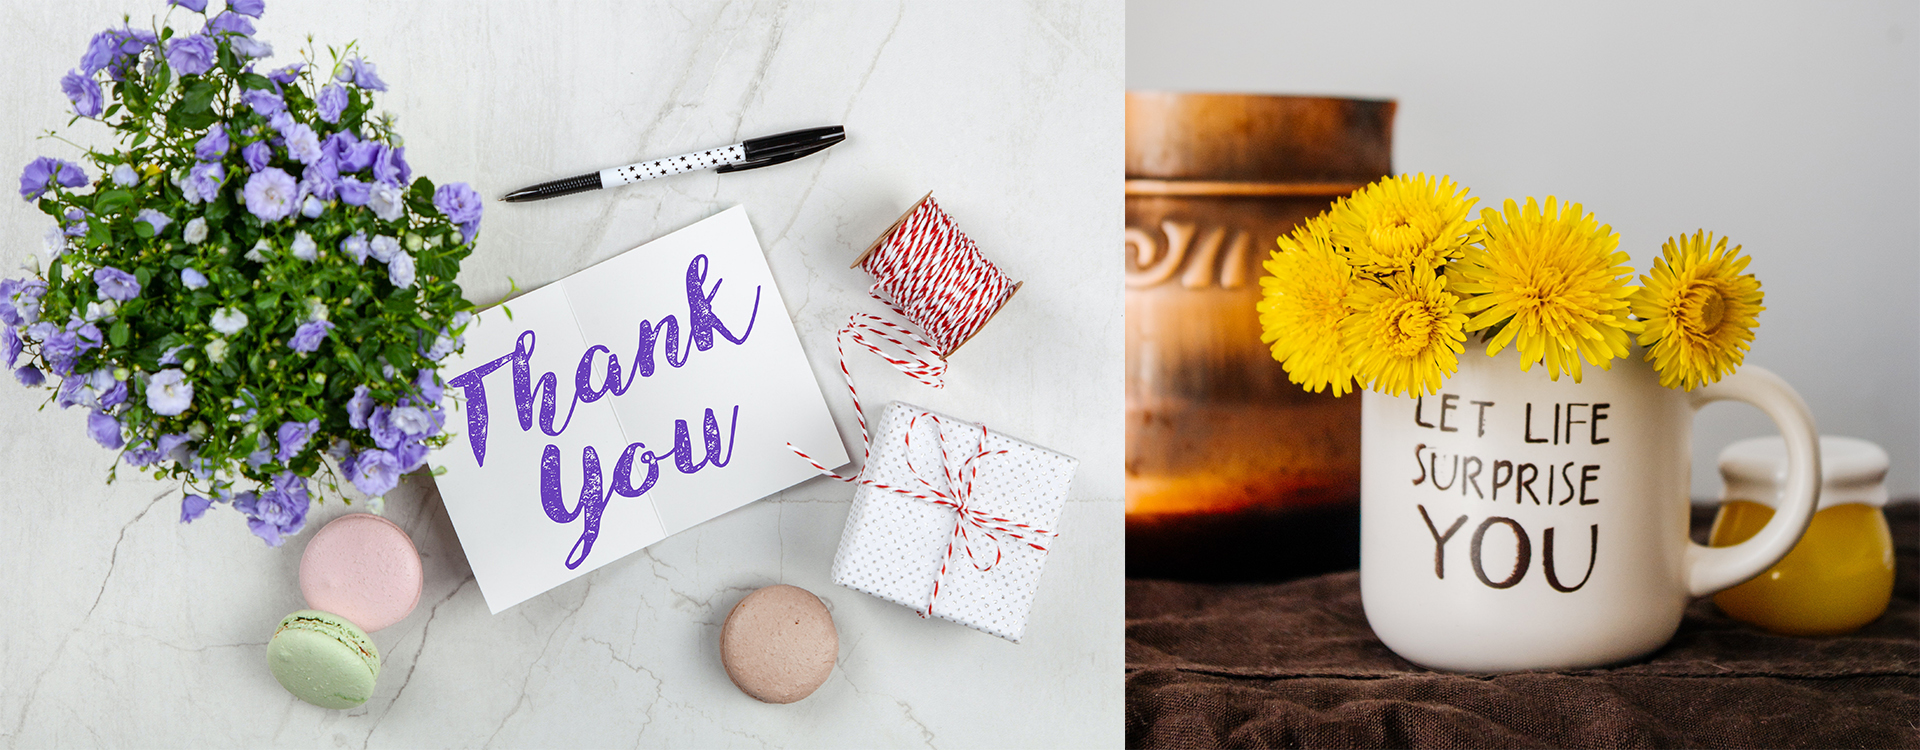 holidays gift suppliers thank you cards express thank you gifts under $3